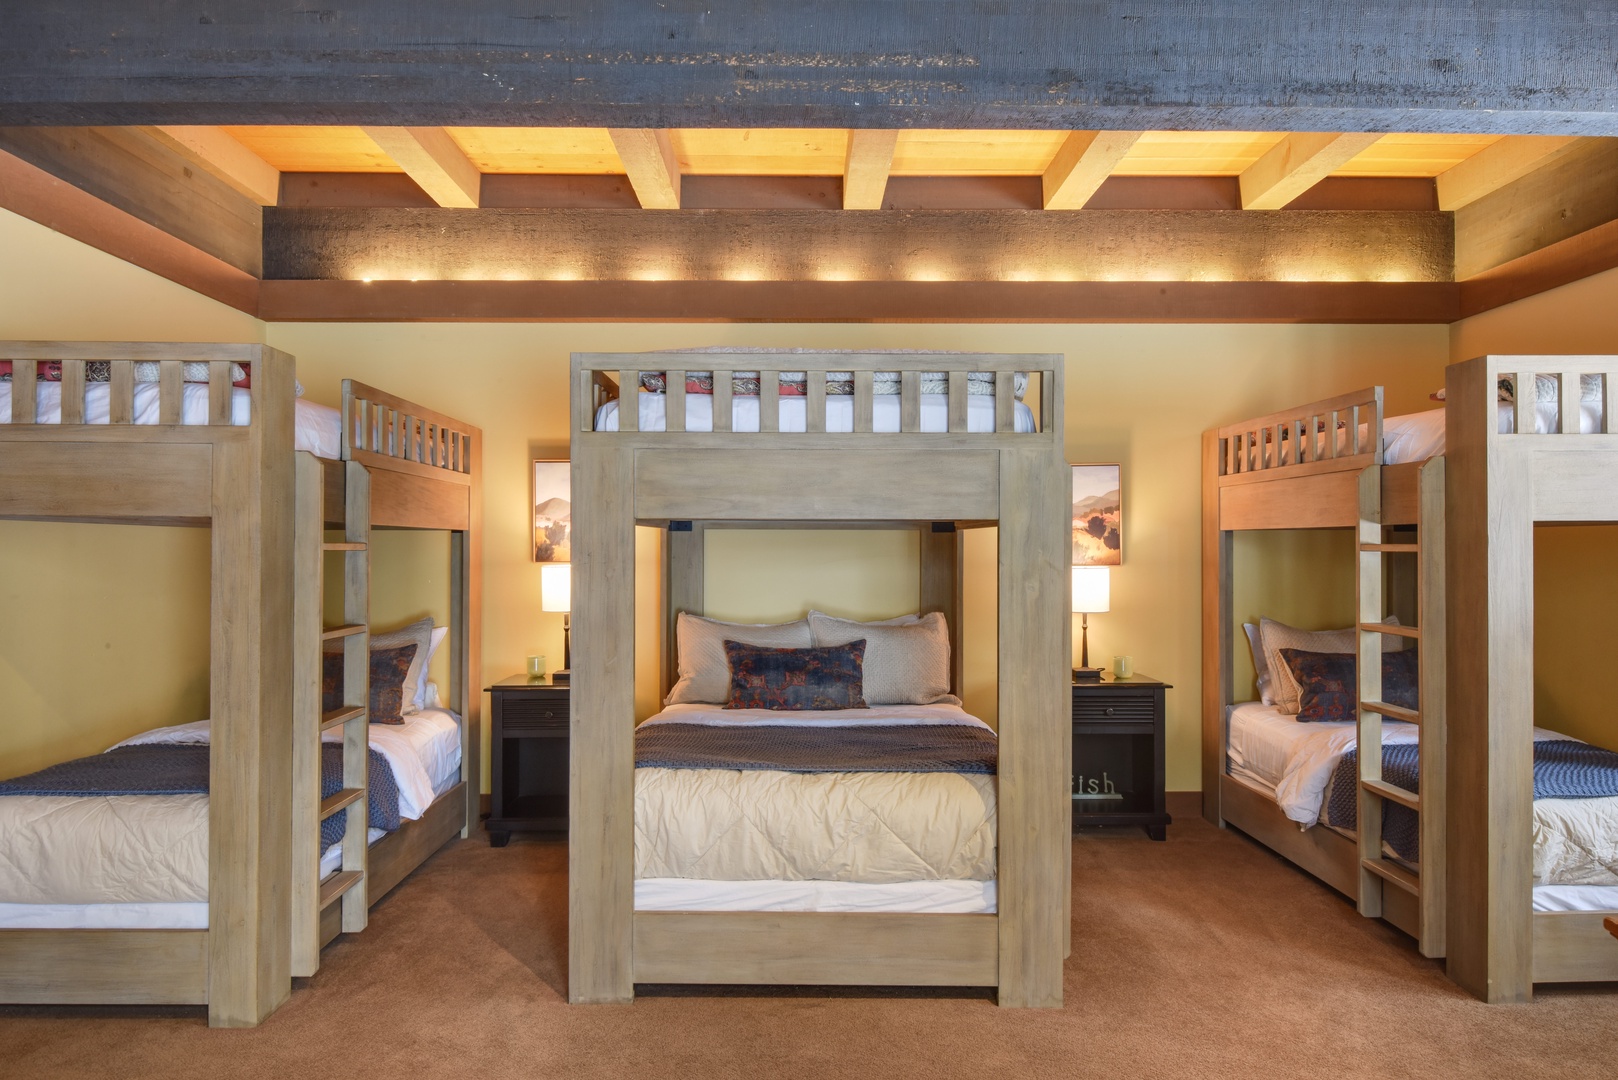 Ideal sleeping quarters for family and friends